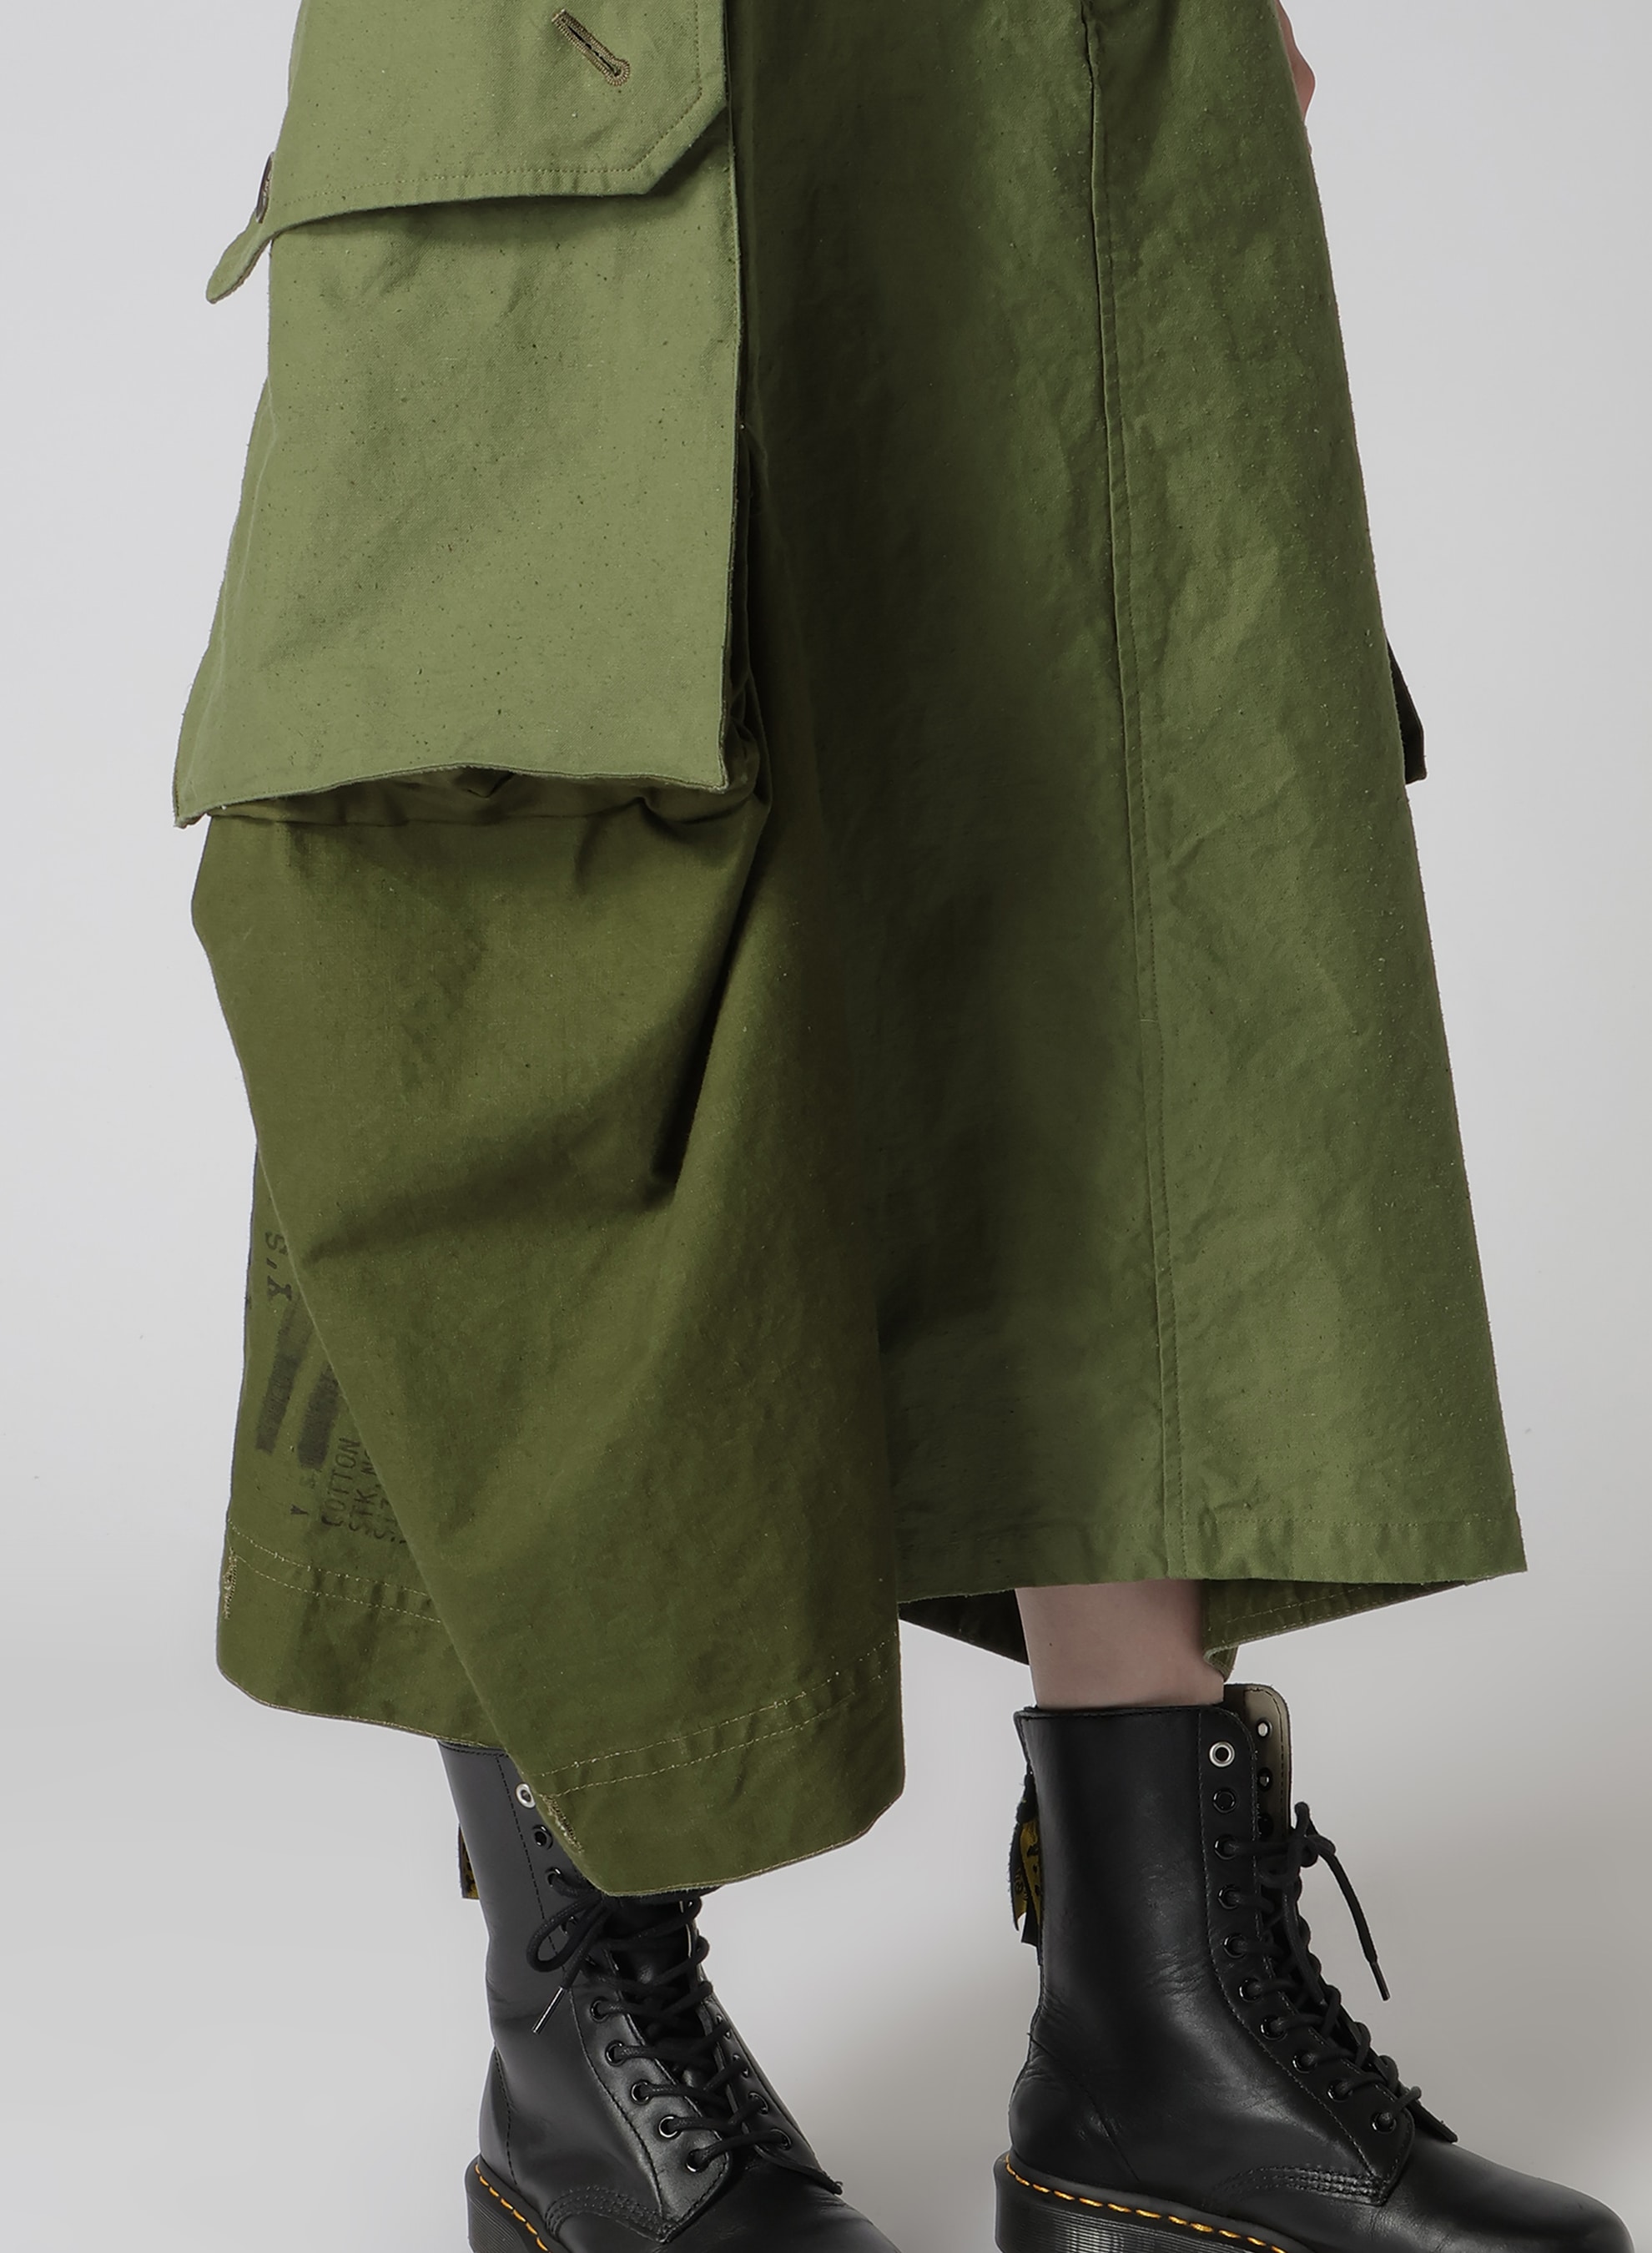 MILITARY TENT CLOTH CARGO PANTS-STYLE SKIRT